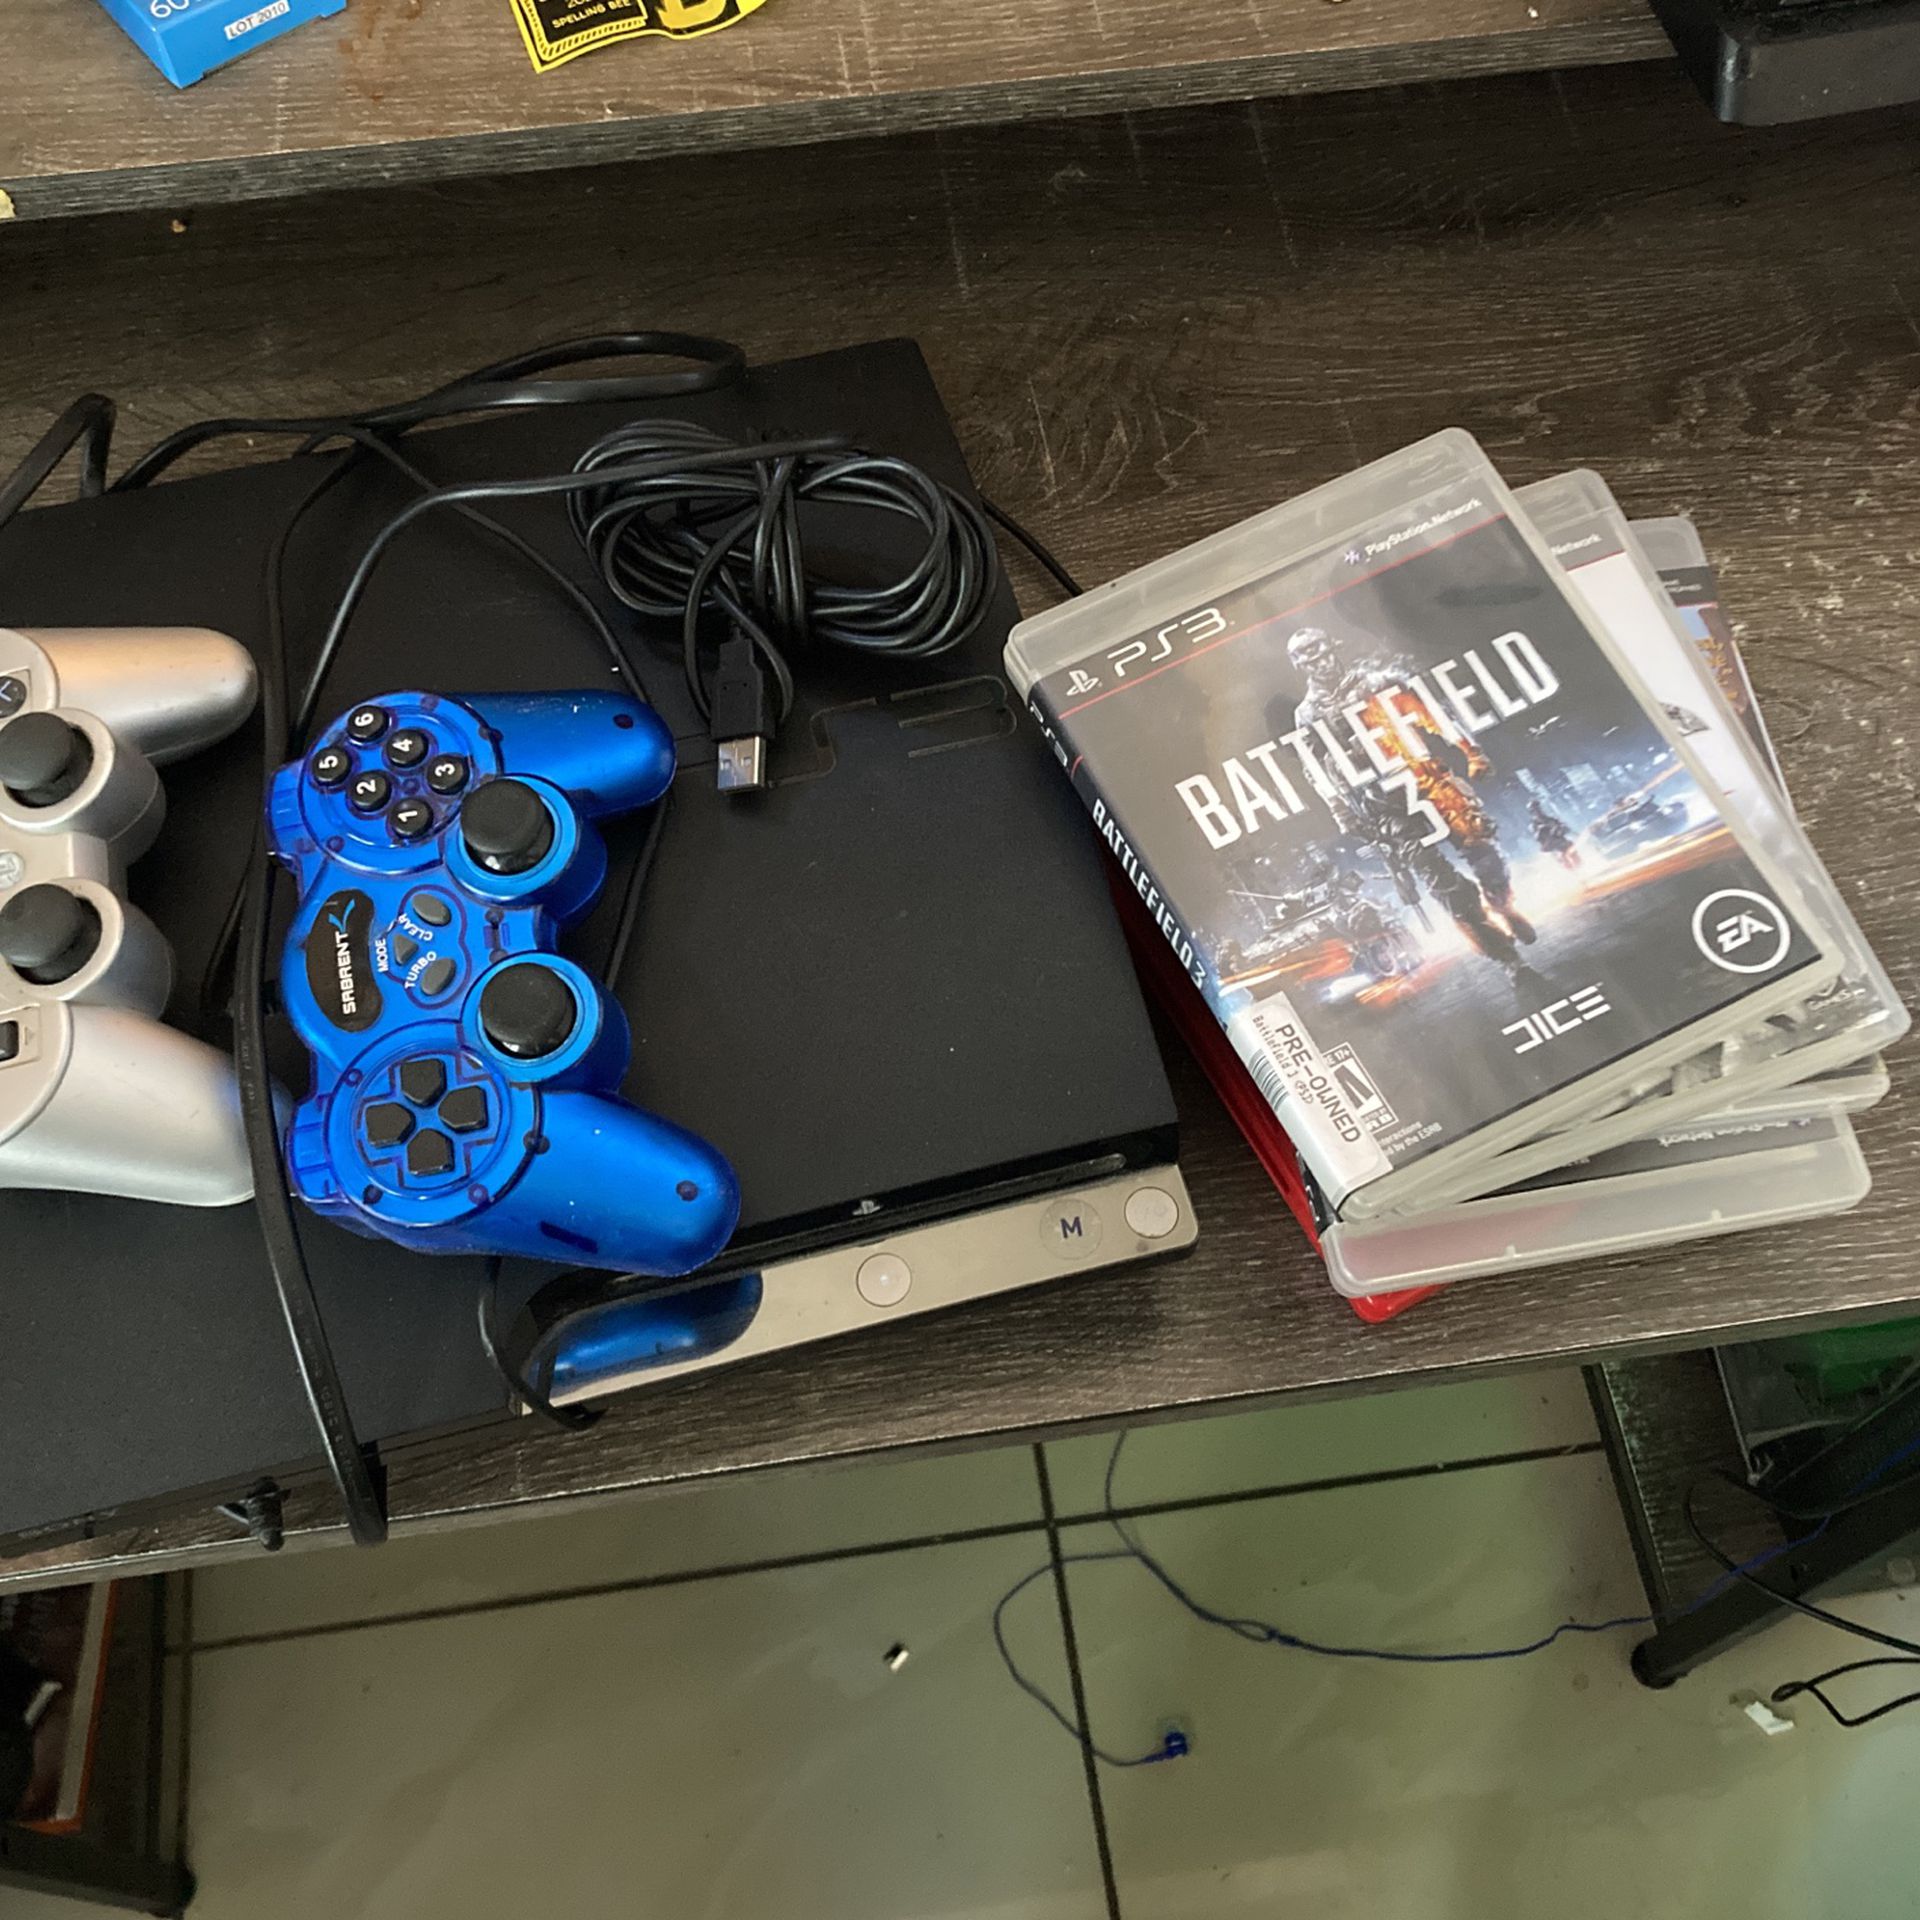 PS3 For Sale!